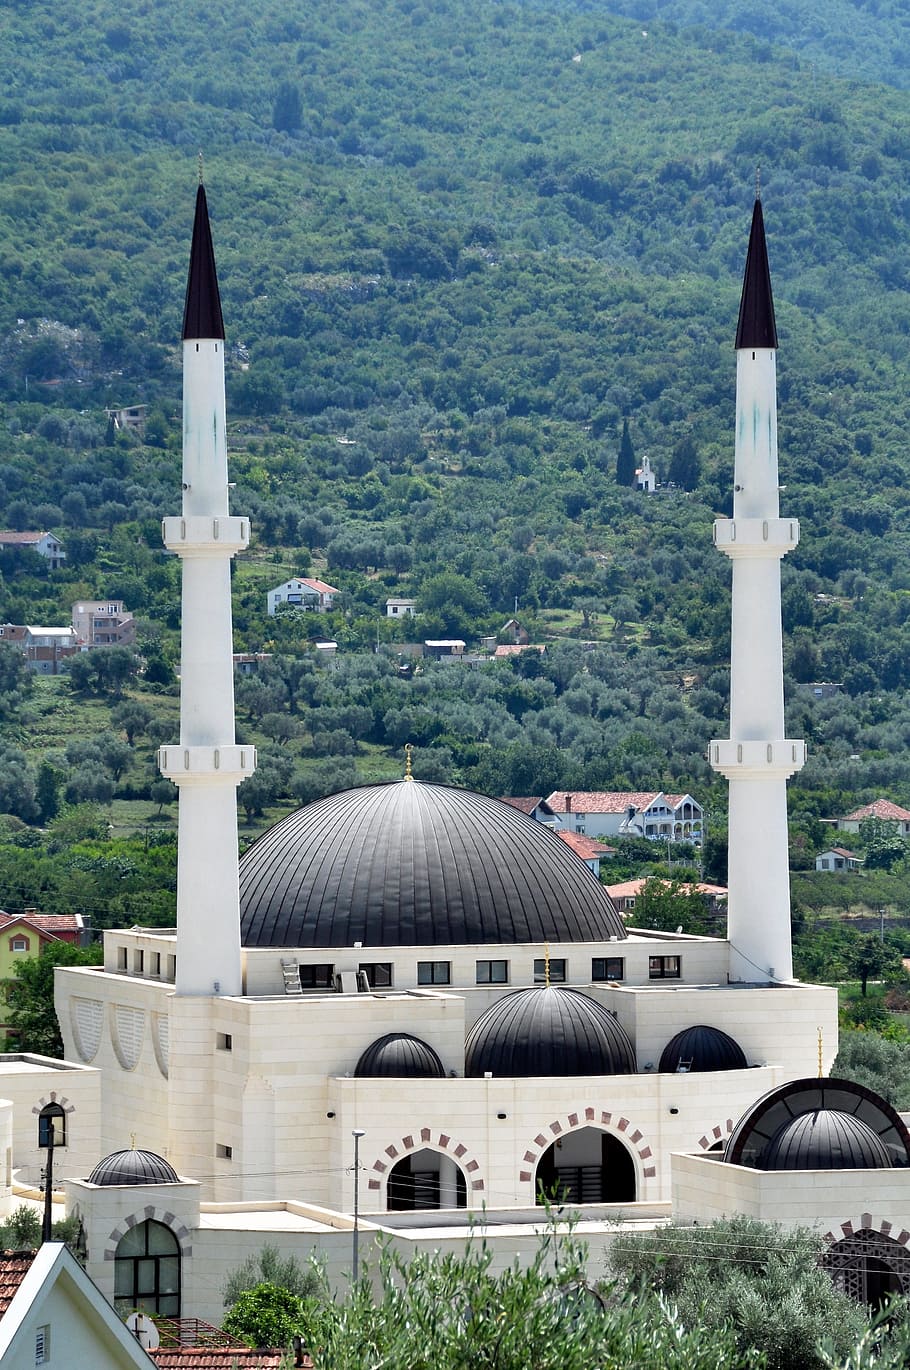 Mosque, Minaret, House Of Prayer, muslims, religion, dome, towers, montenegro, islam, turkey - Middle East